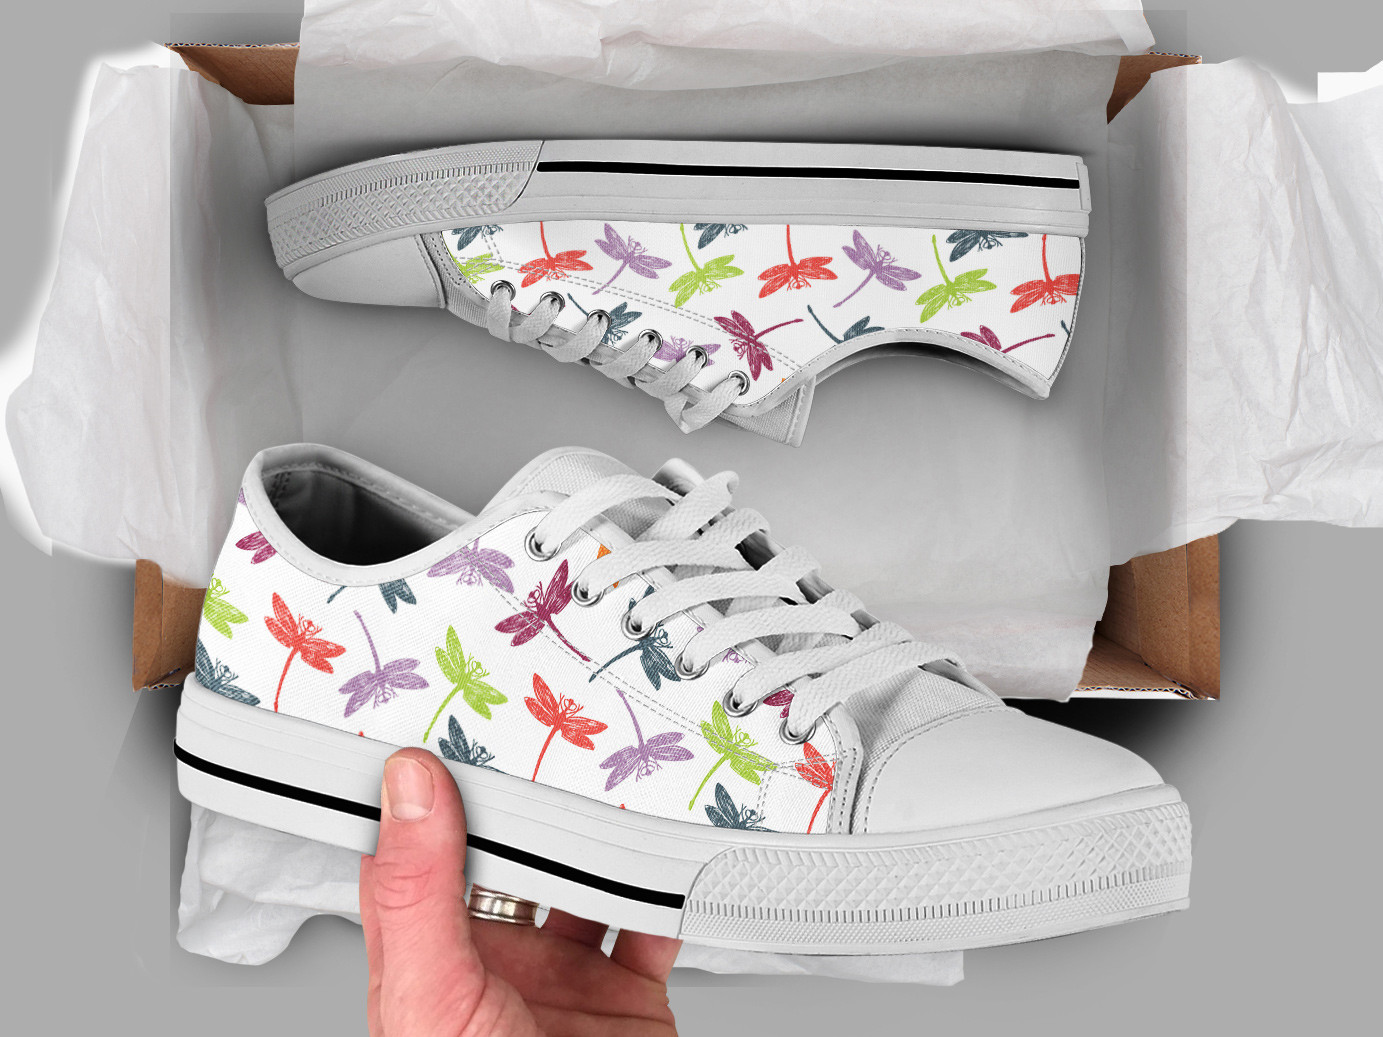 Cute Dragonfly Shoes | Custom Low Tops Sneakers For Kids & Adults